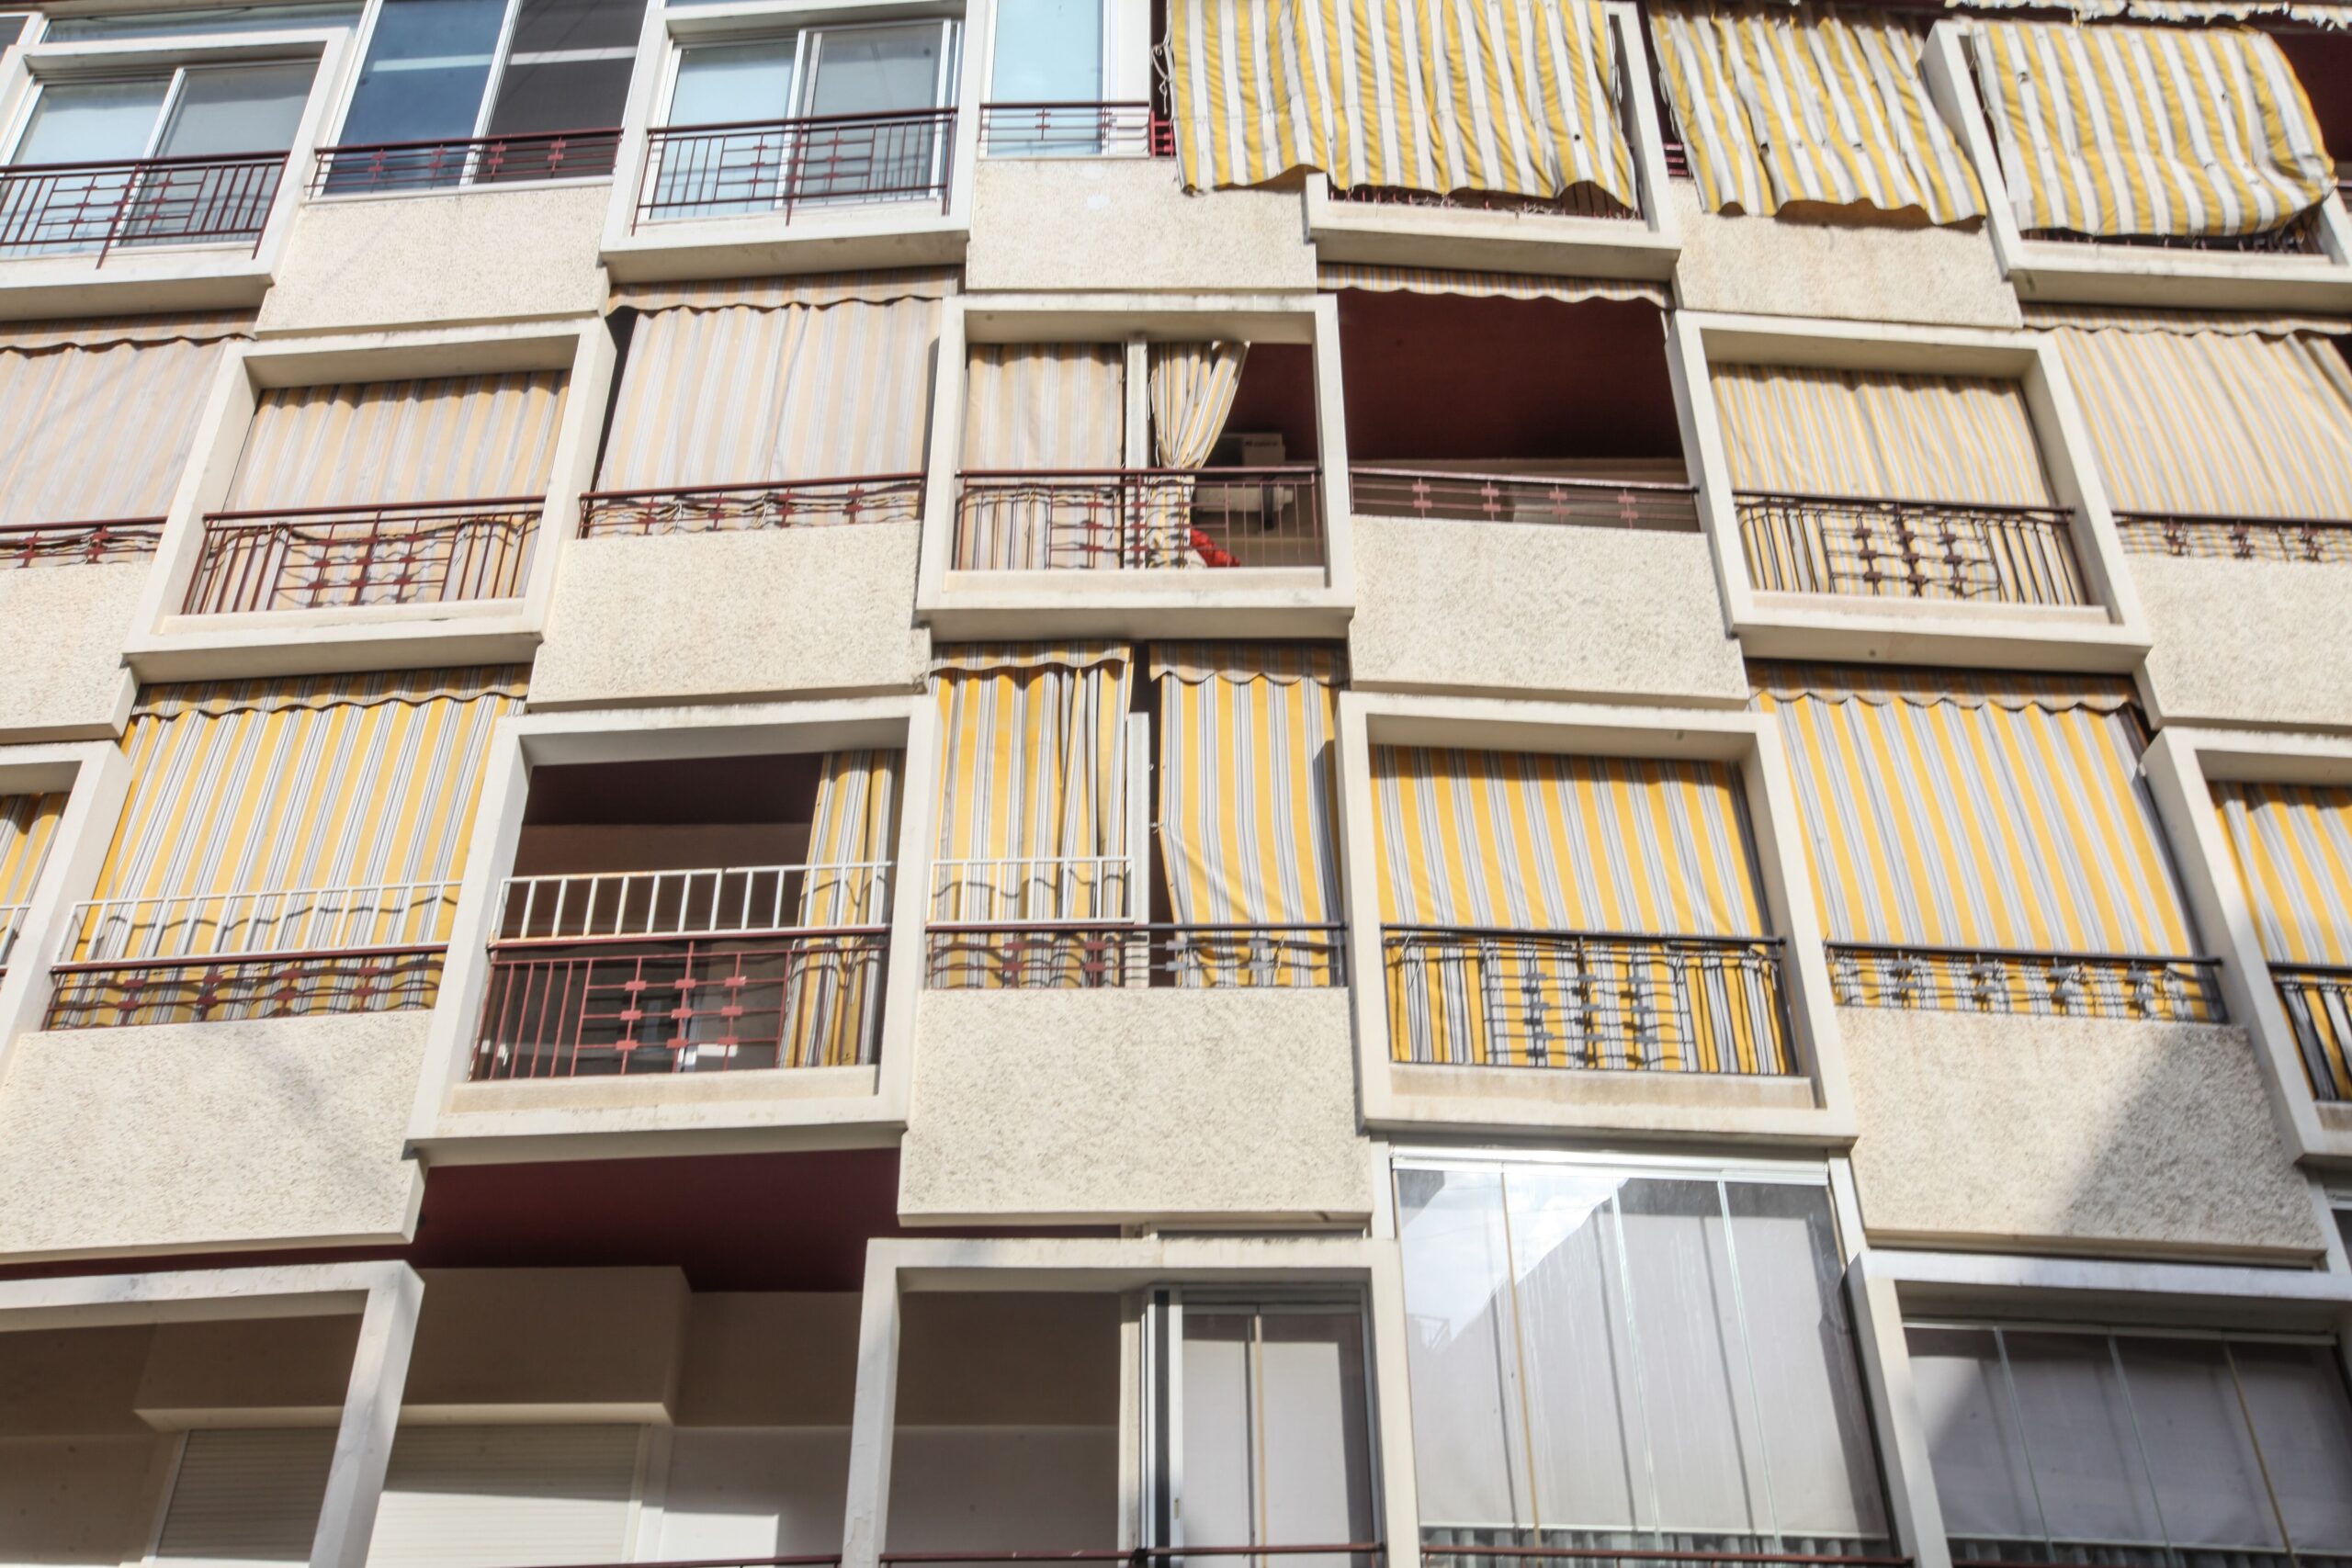 Beirut’s Balconies: The Transformation of Urban Residential Culture